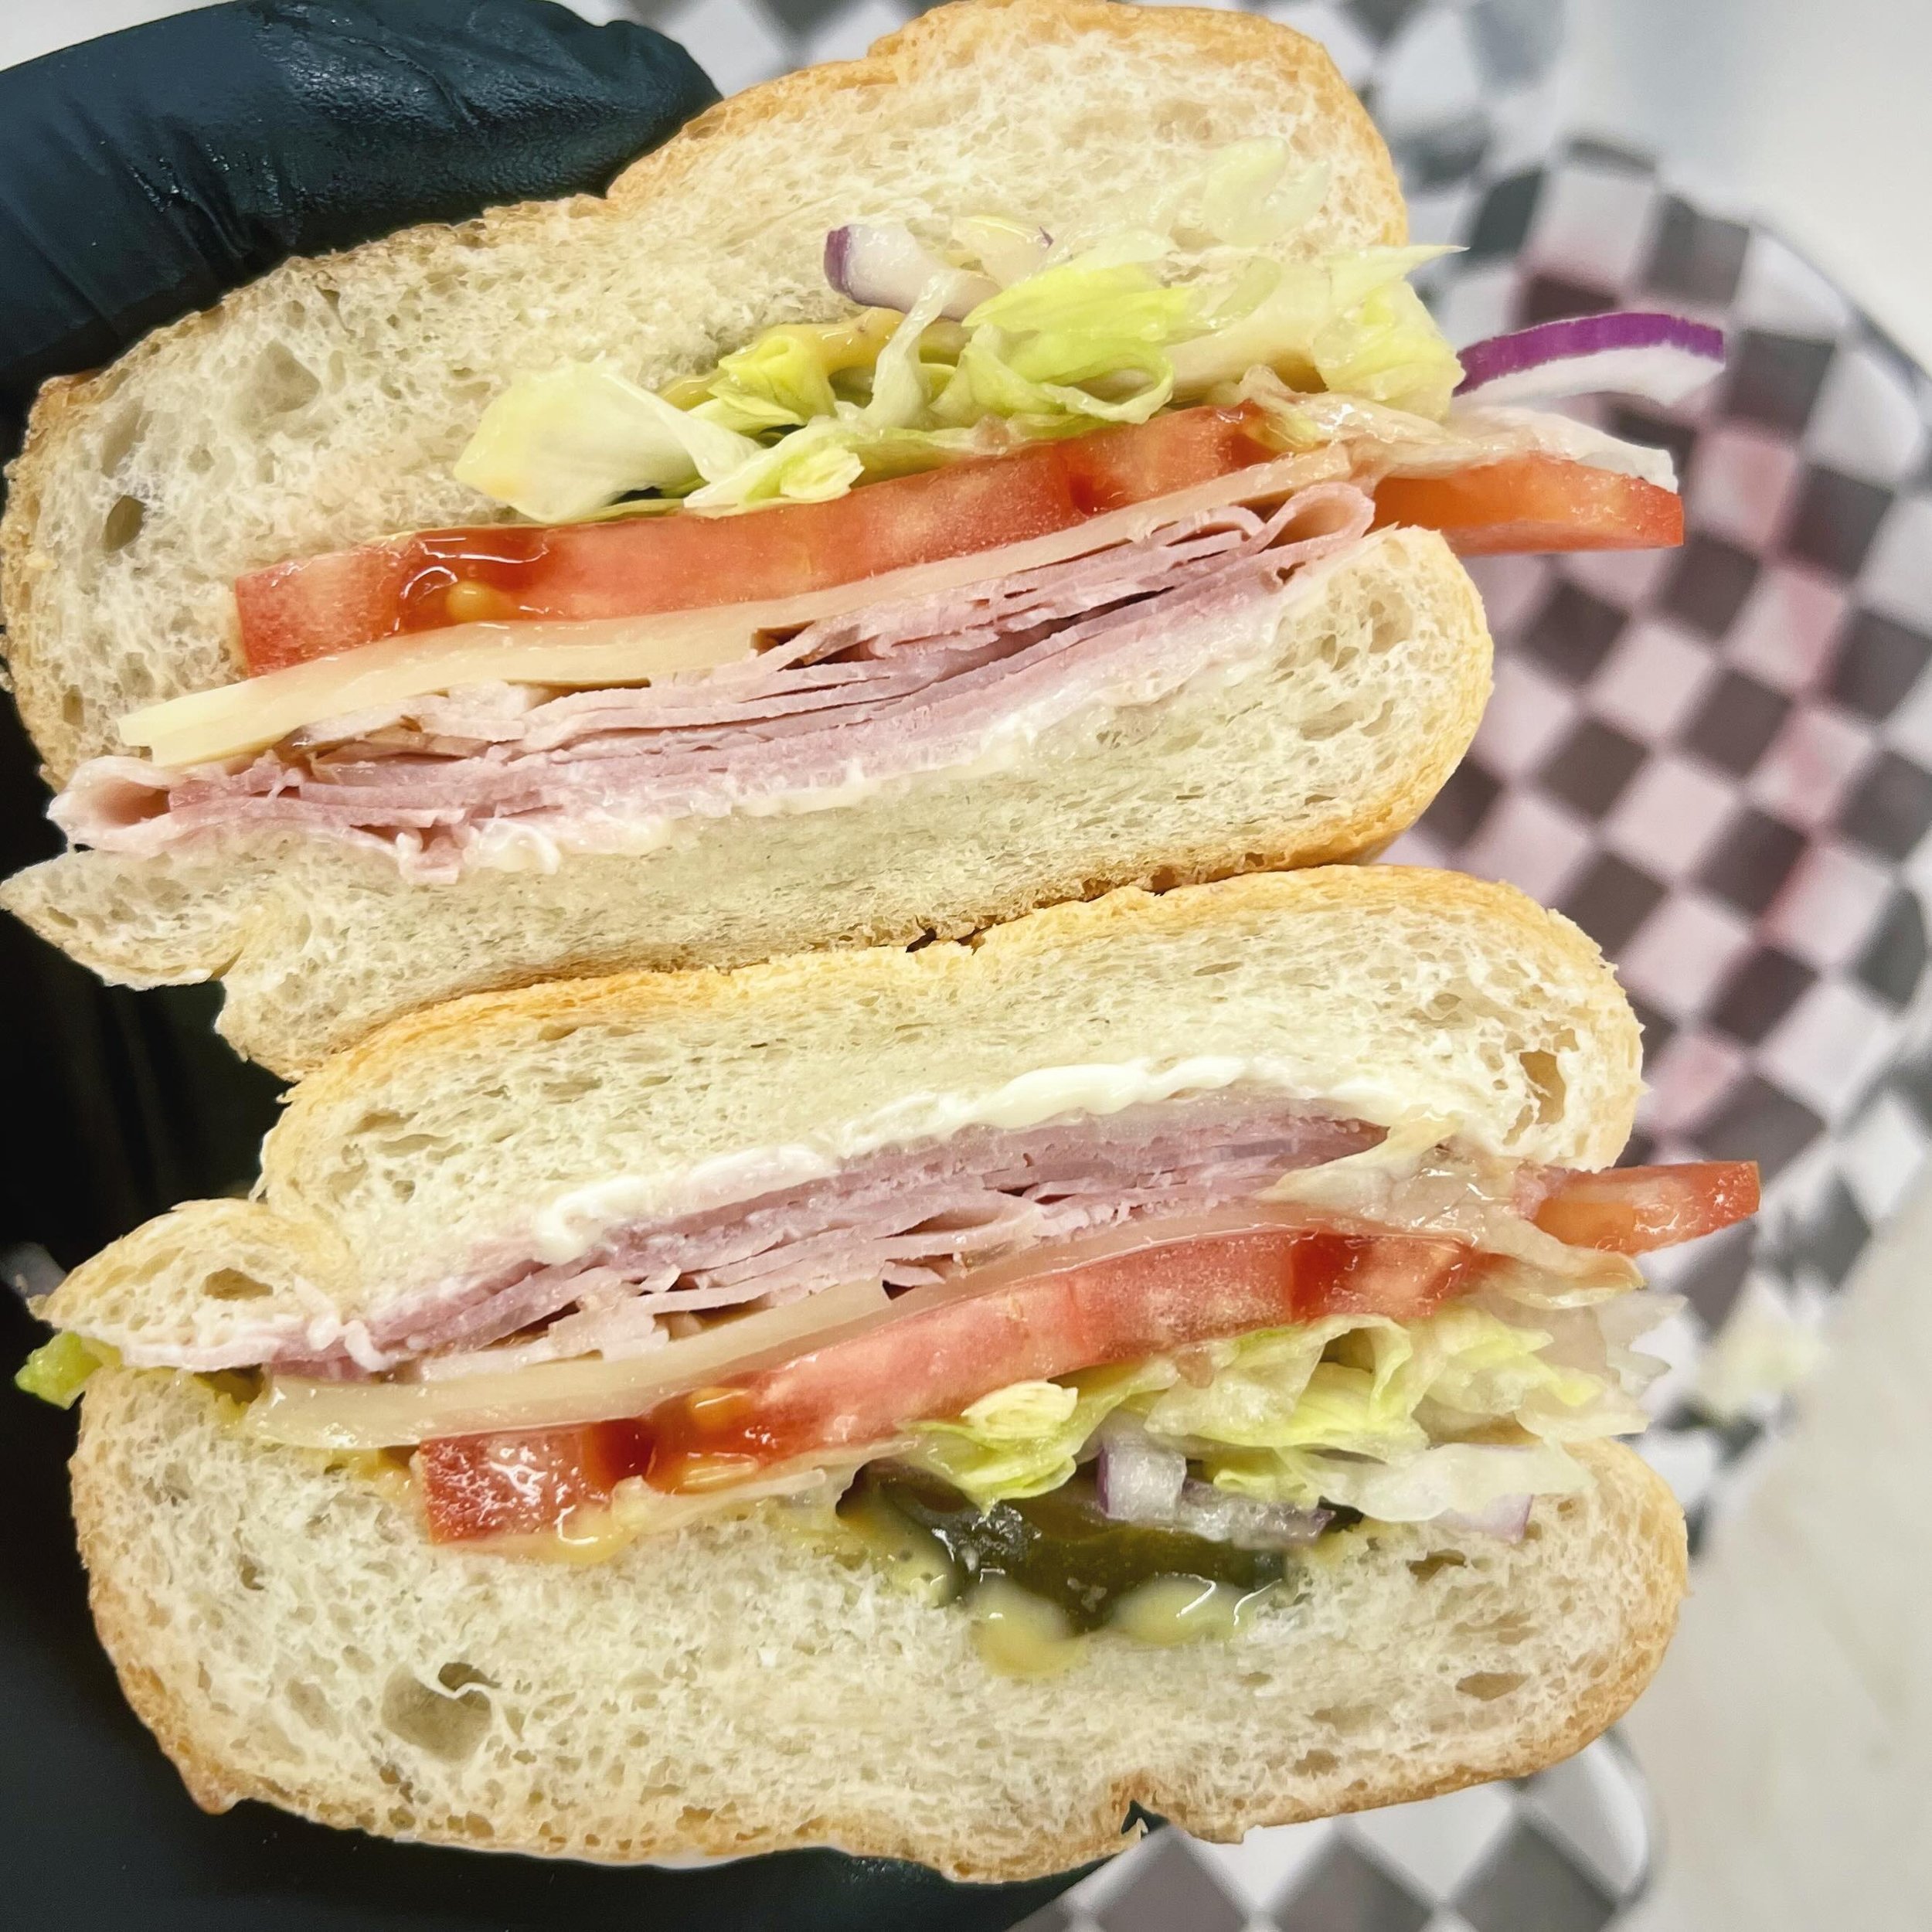 Go Hog Wild - it&rsquo;s Spring Break! Our Spring Break special is Hog Wild, featuring Boar&rsquo;s Head ham, swiss cheese, honey mustard with lettuce, tomato, onion, pickle and mayo on a Macrina bun. Available this week! 

#sandwichspecial #hamandsw